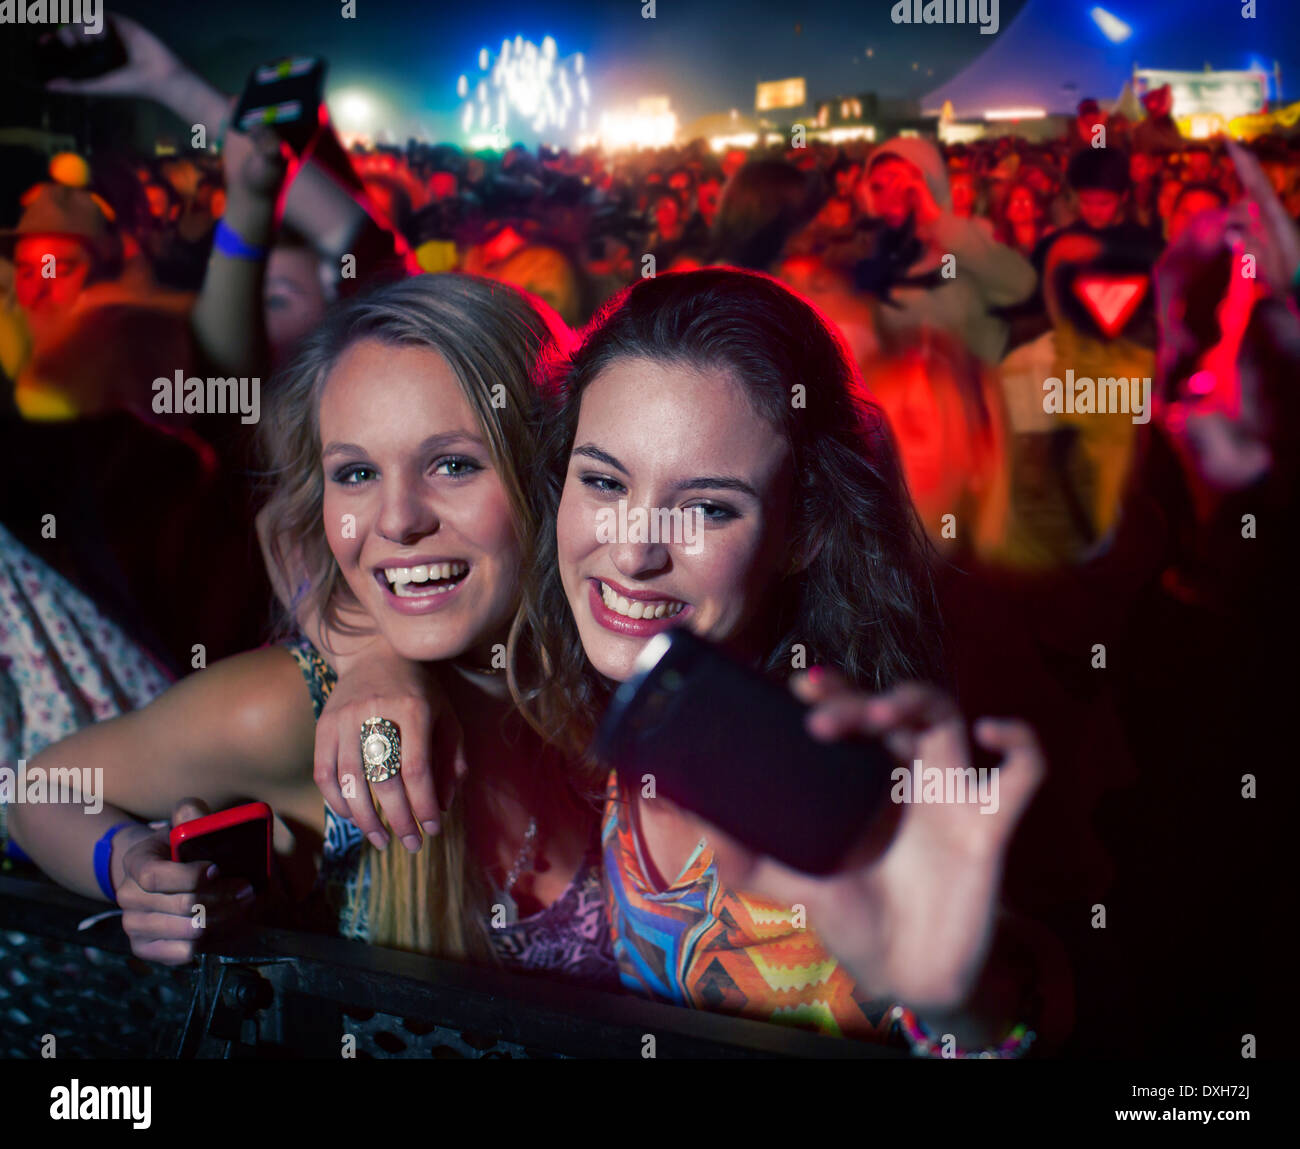 Friends taking self-portrait with camera phone at music festival Stock Photo